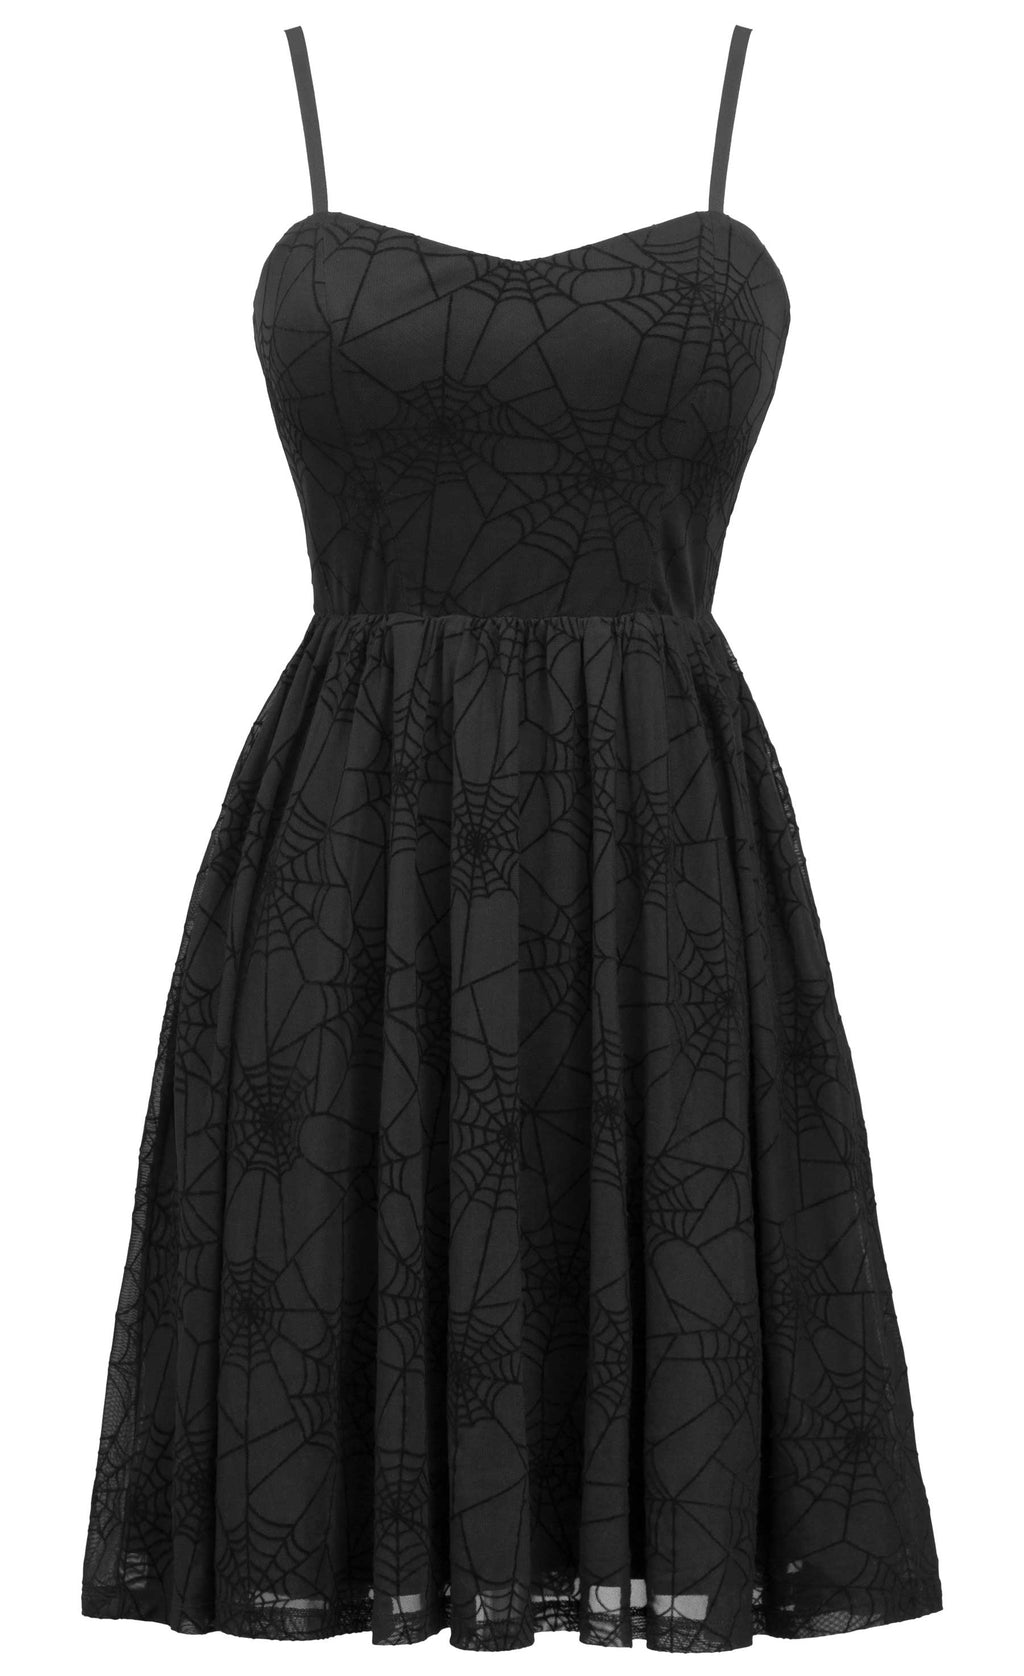 Spiderweb Swing Dress with Pockets in Black